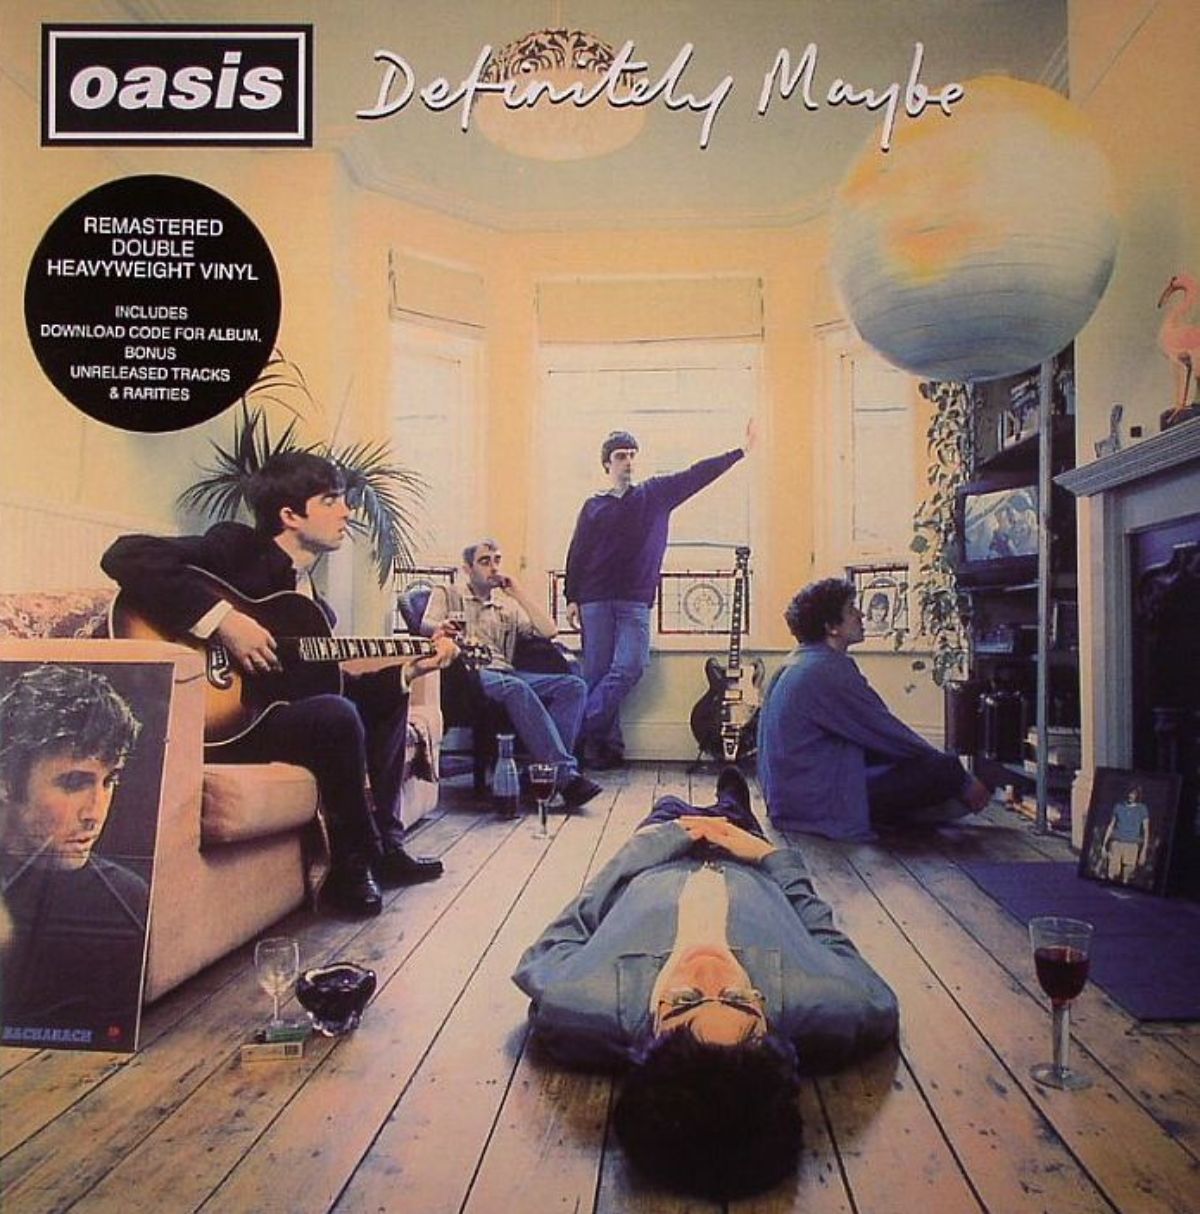 The cover of the music album definitely maybe